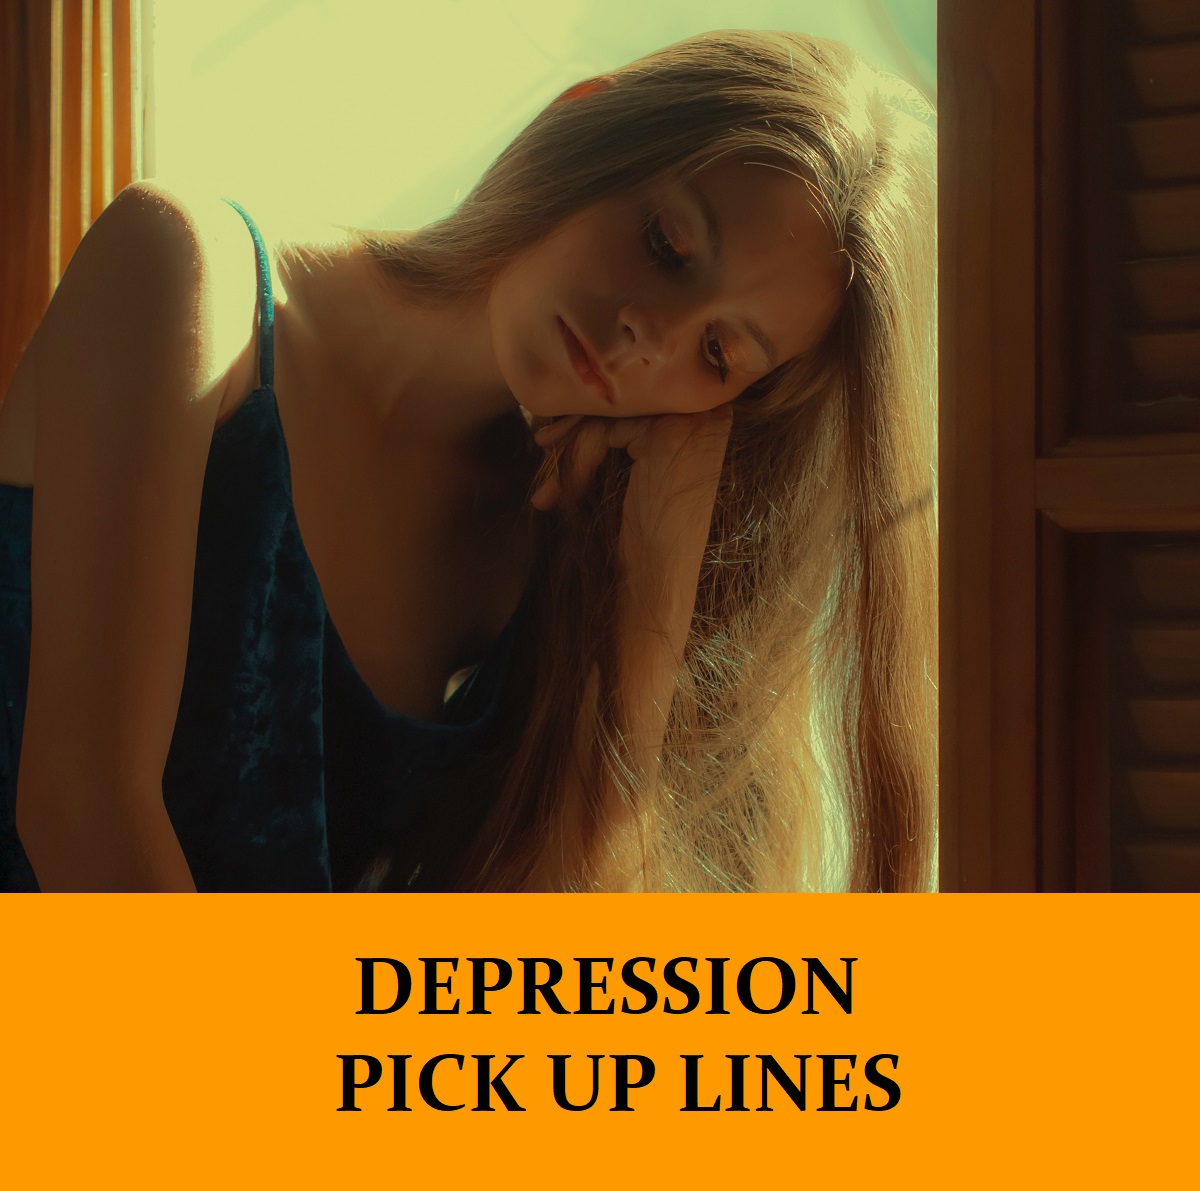 Pick Up Lines About Depression